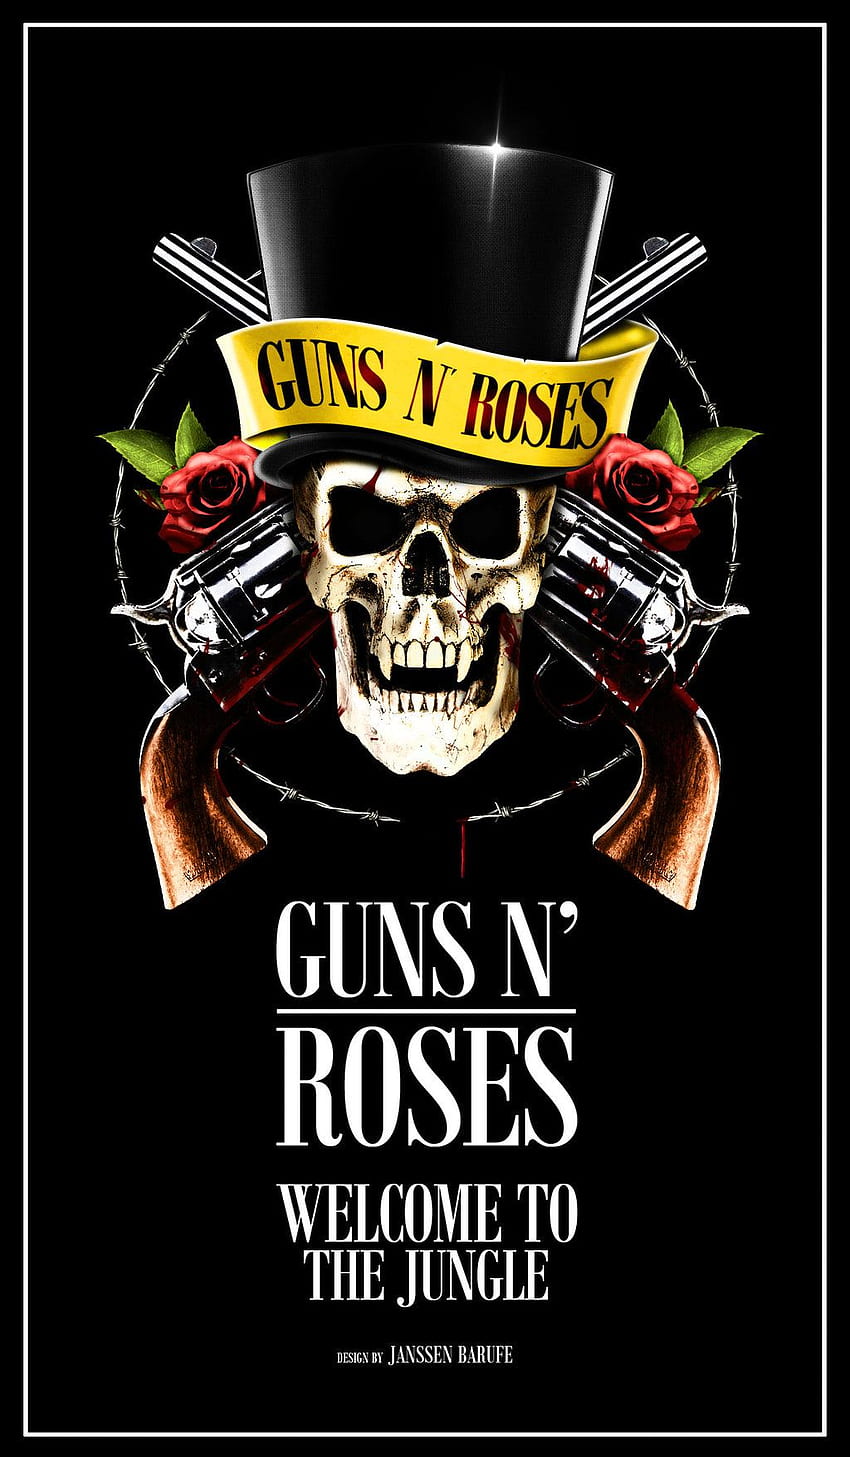 Guns N Roses Wallpaper Collection Android क लए APK डउनलड कर